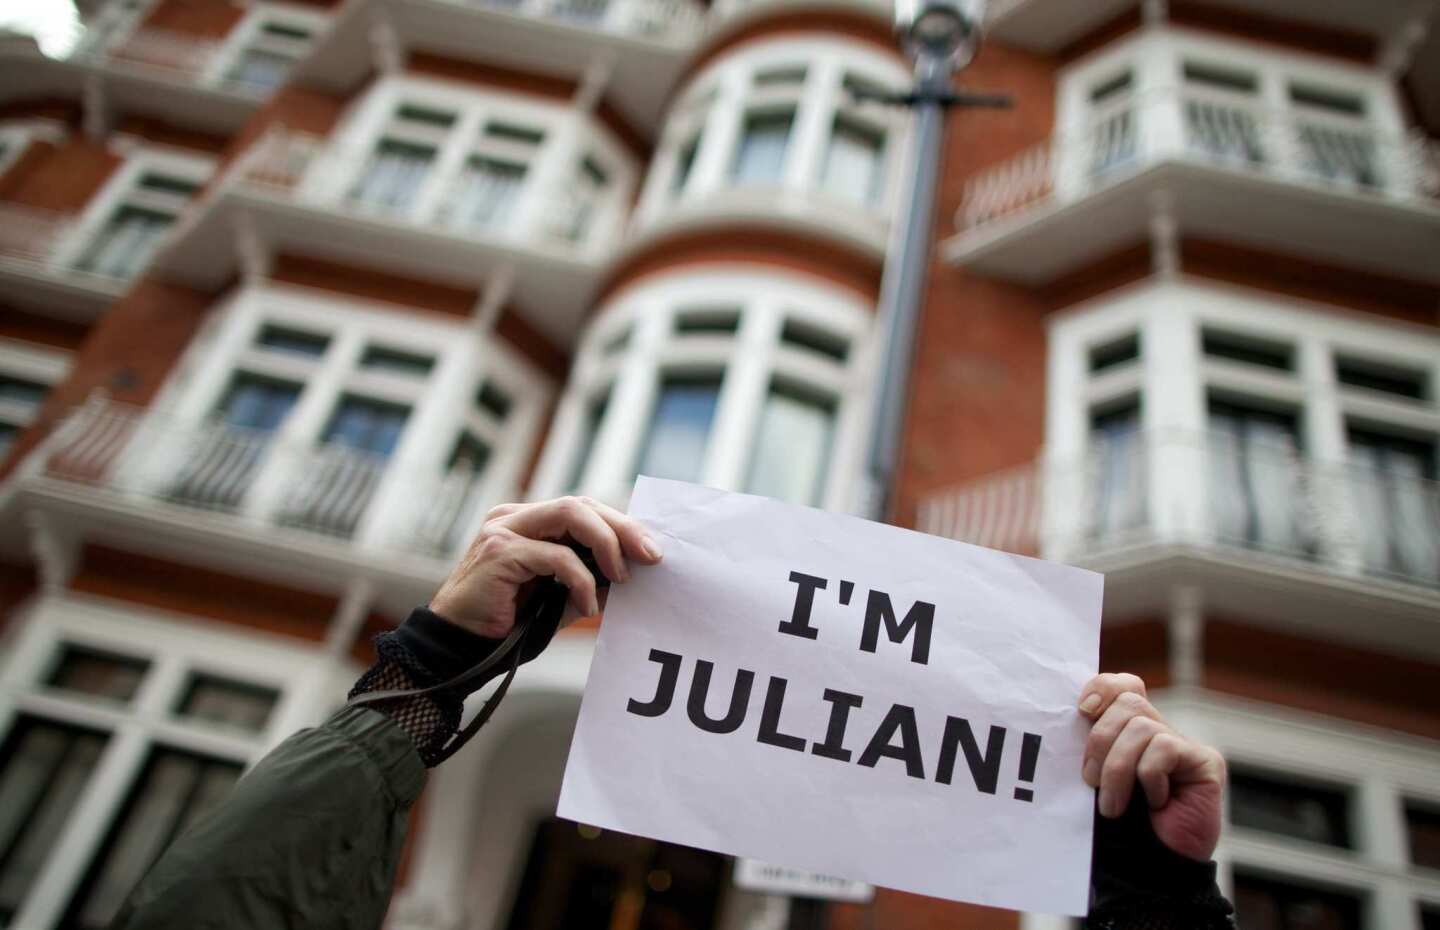 A supporter of Julian Assange stands out